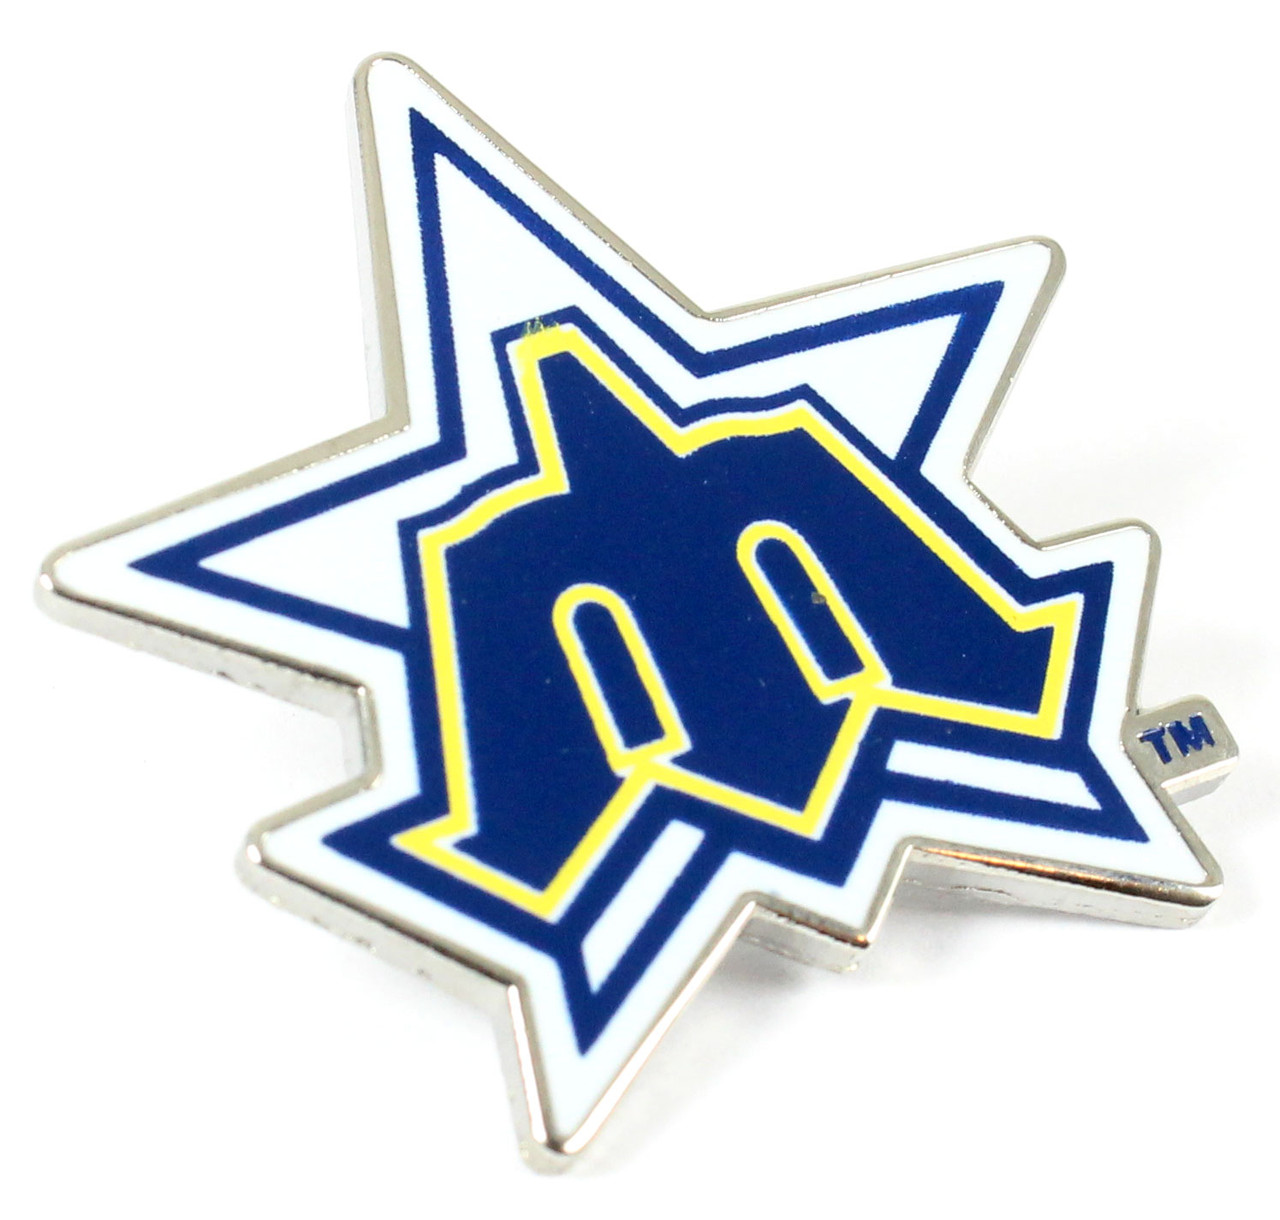 Pin on Seattle Mariners